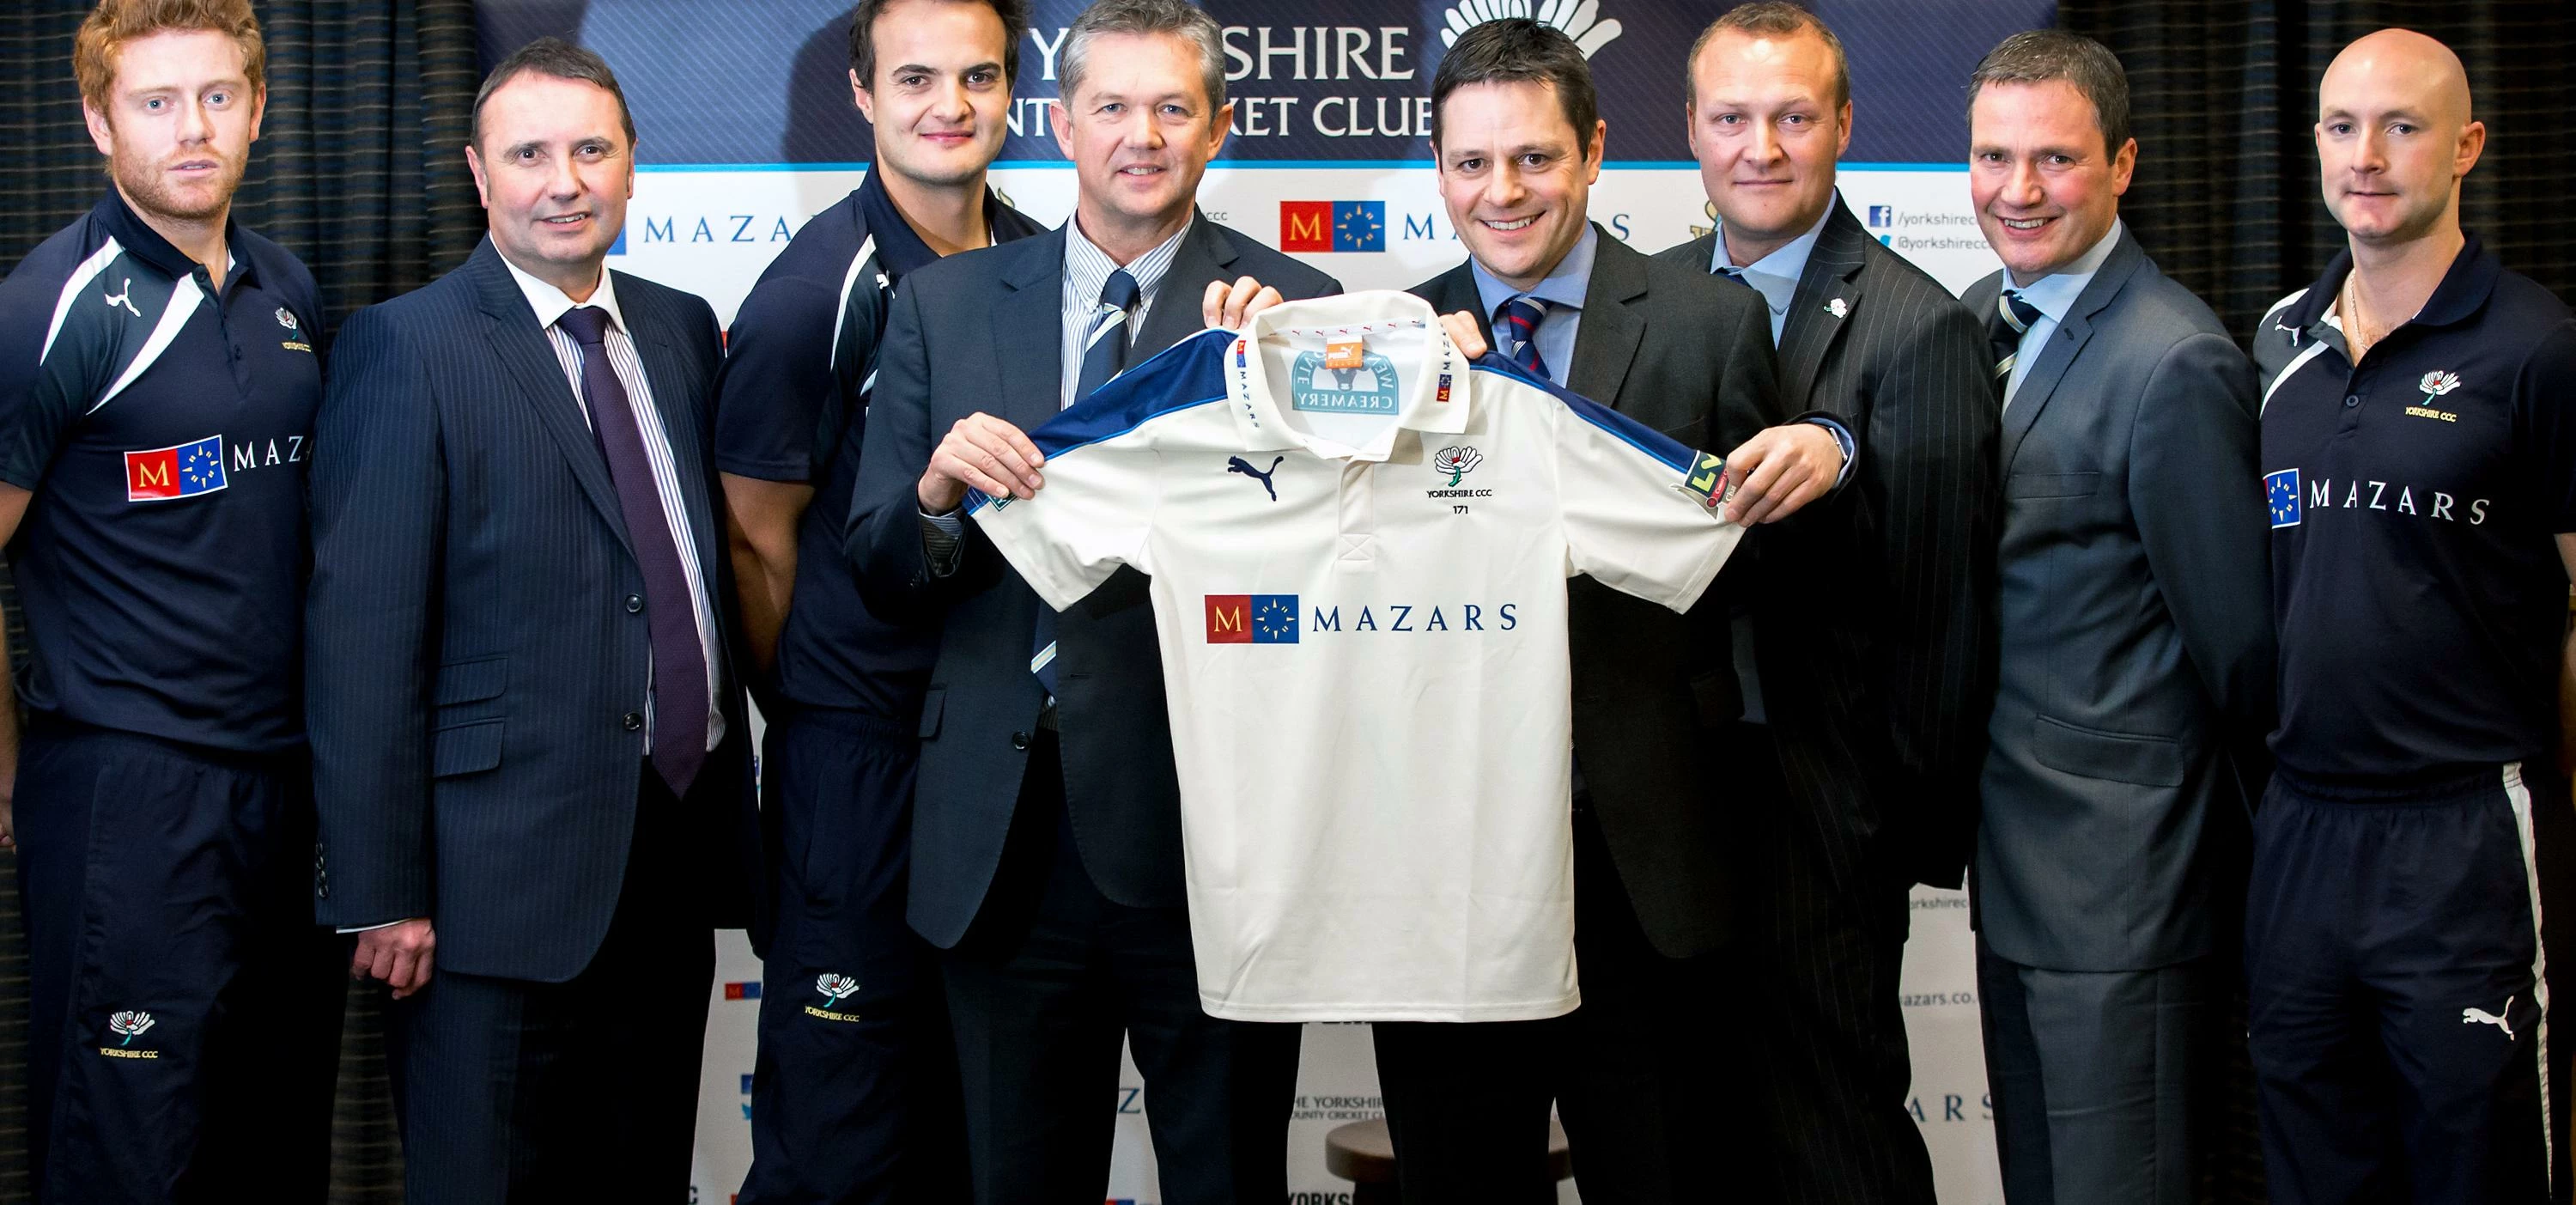 Mazars with the Yorkshire County Cricket team 